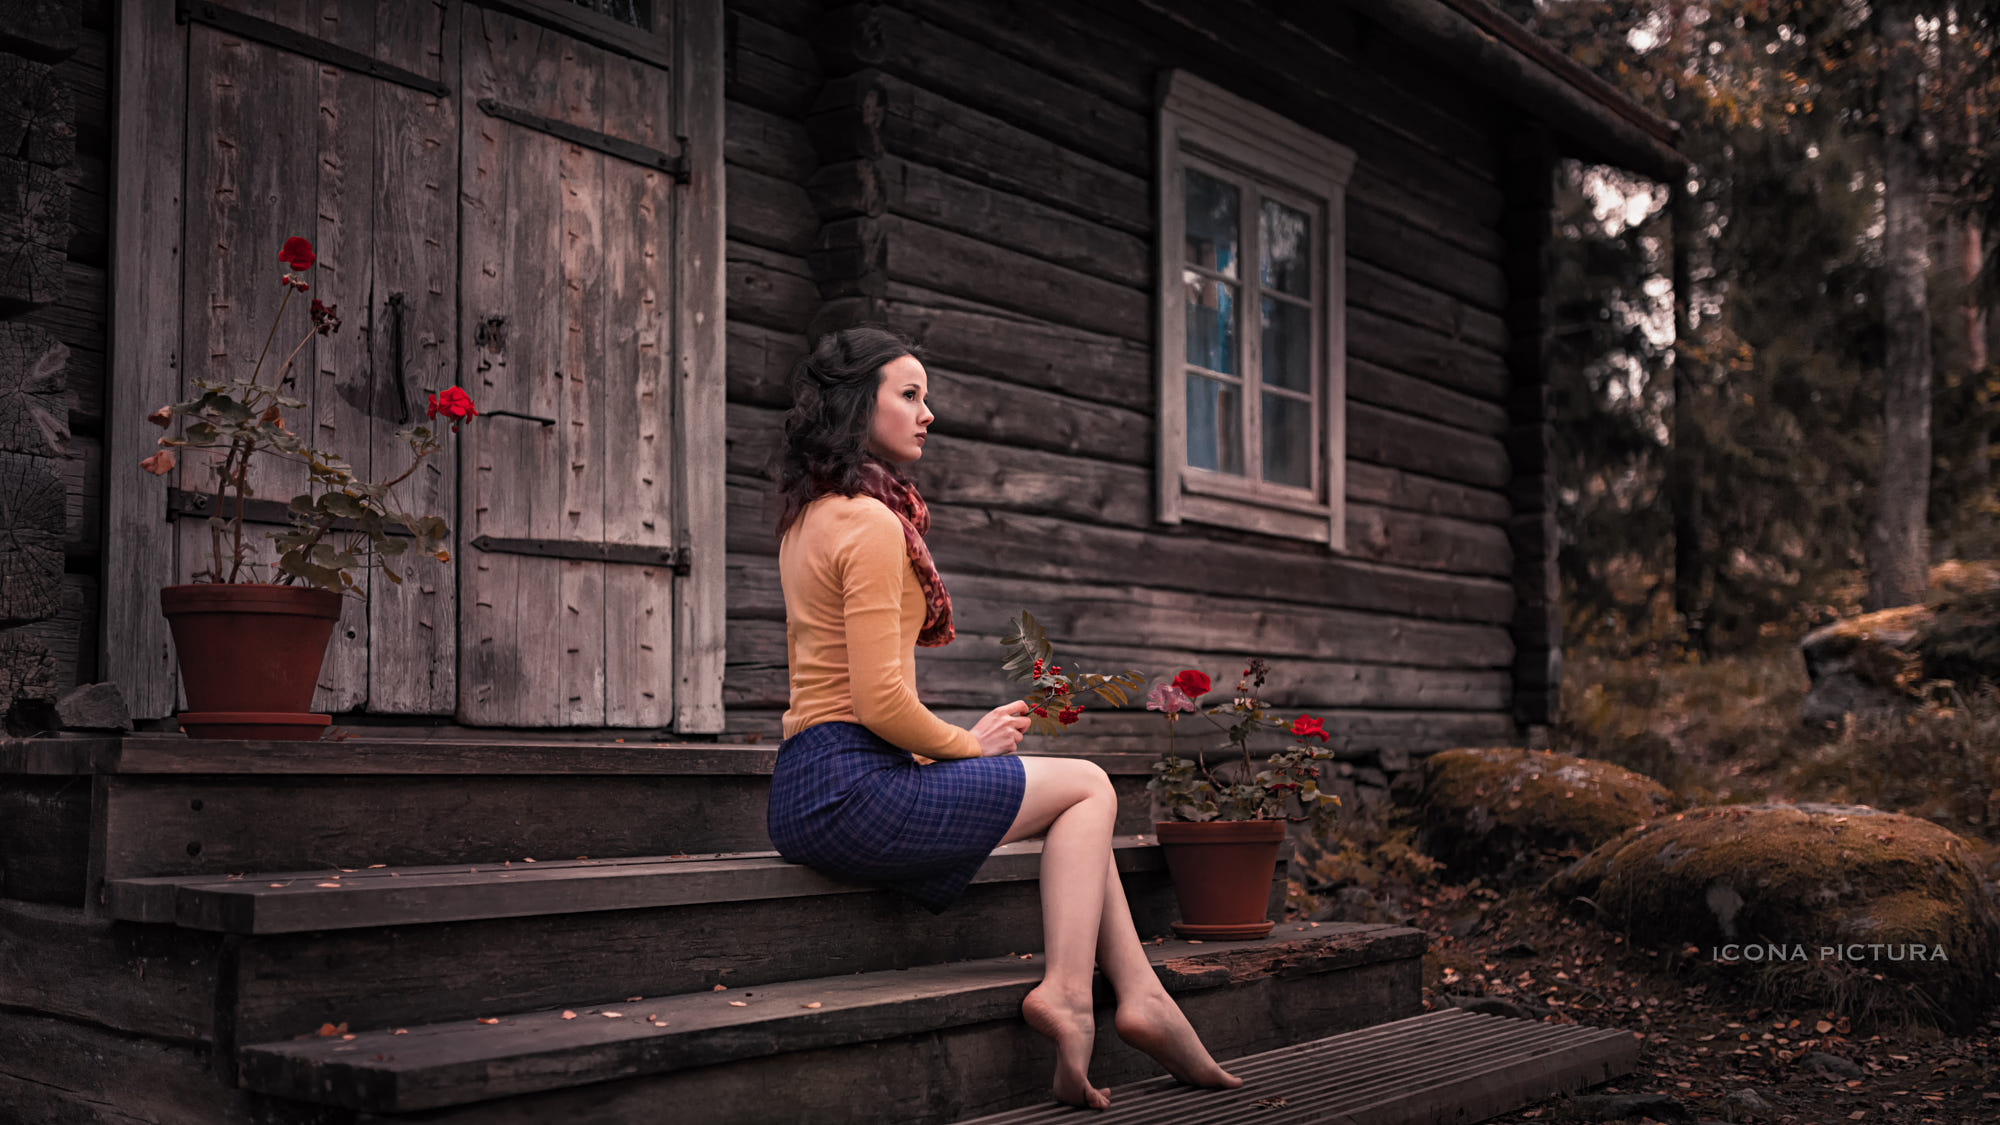 People 2000x1125 Icona Pictura women 500px photography barefoot tiptoe cabin